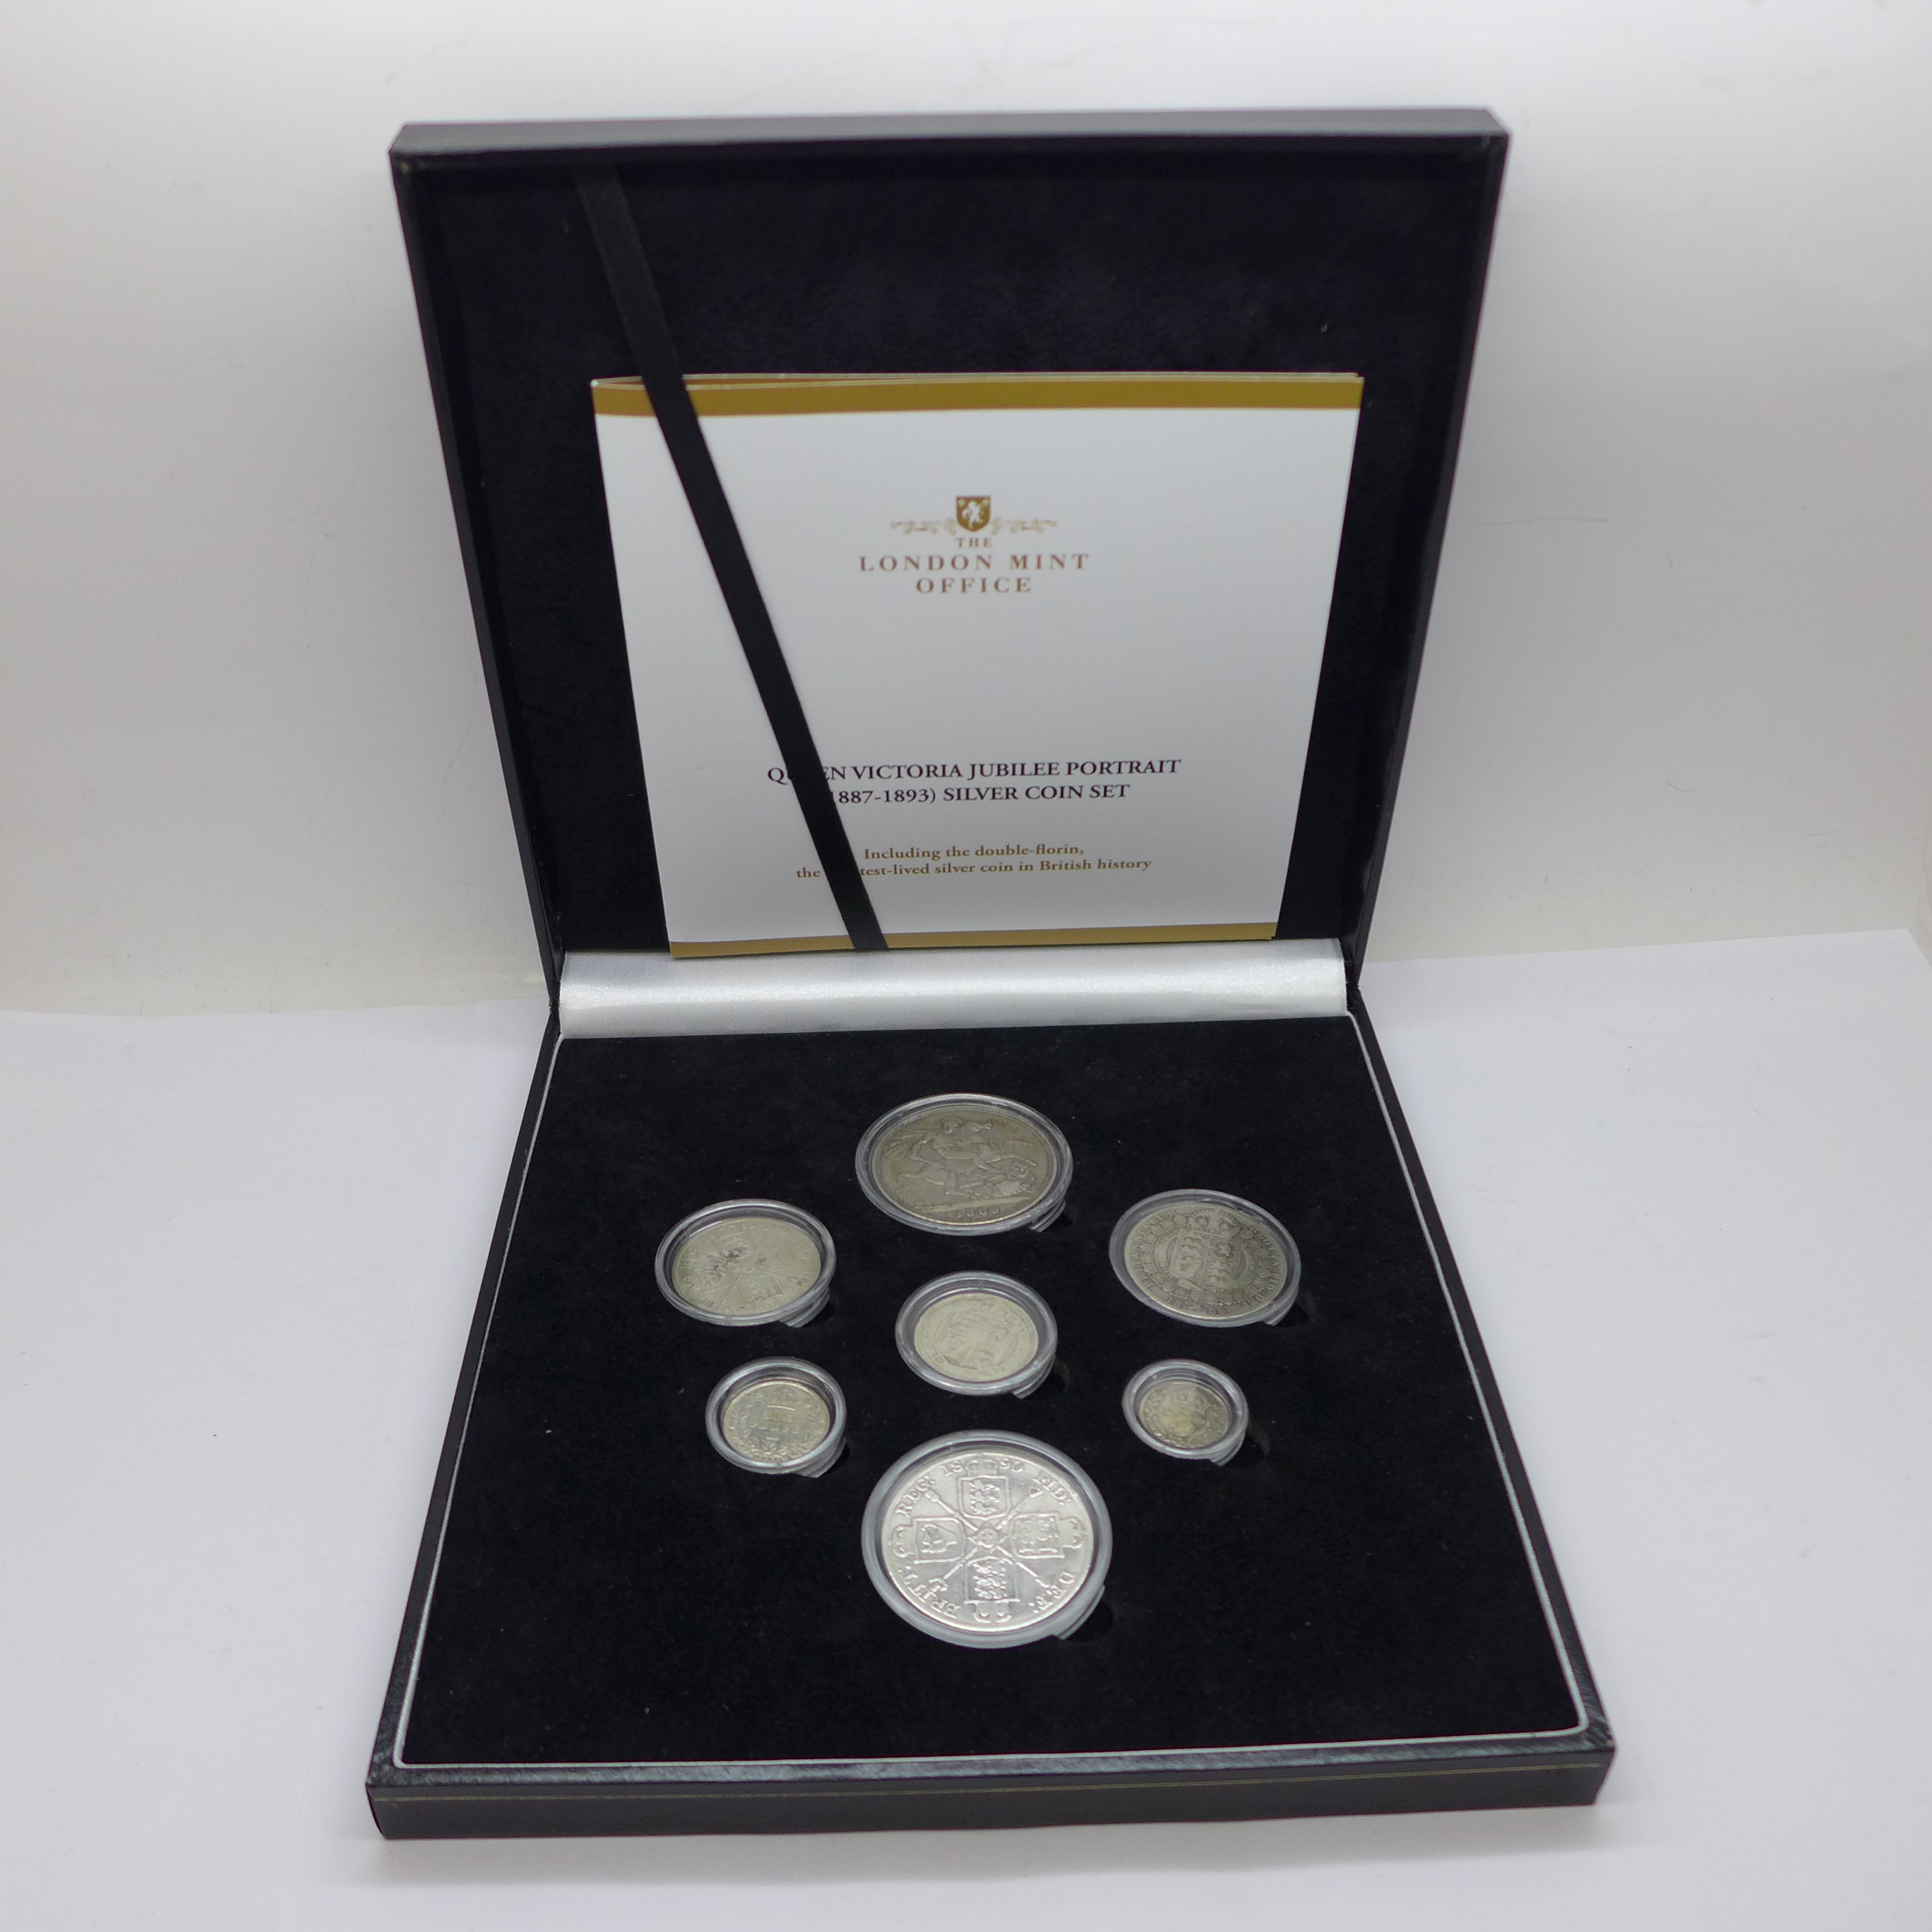 A The London Mint Office Queen Victoria Jubilee Portrait 1887-1893 Silver Coin Set, cased